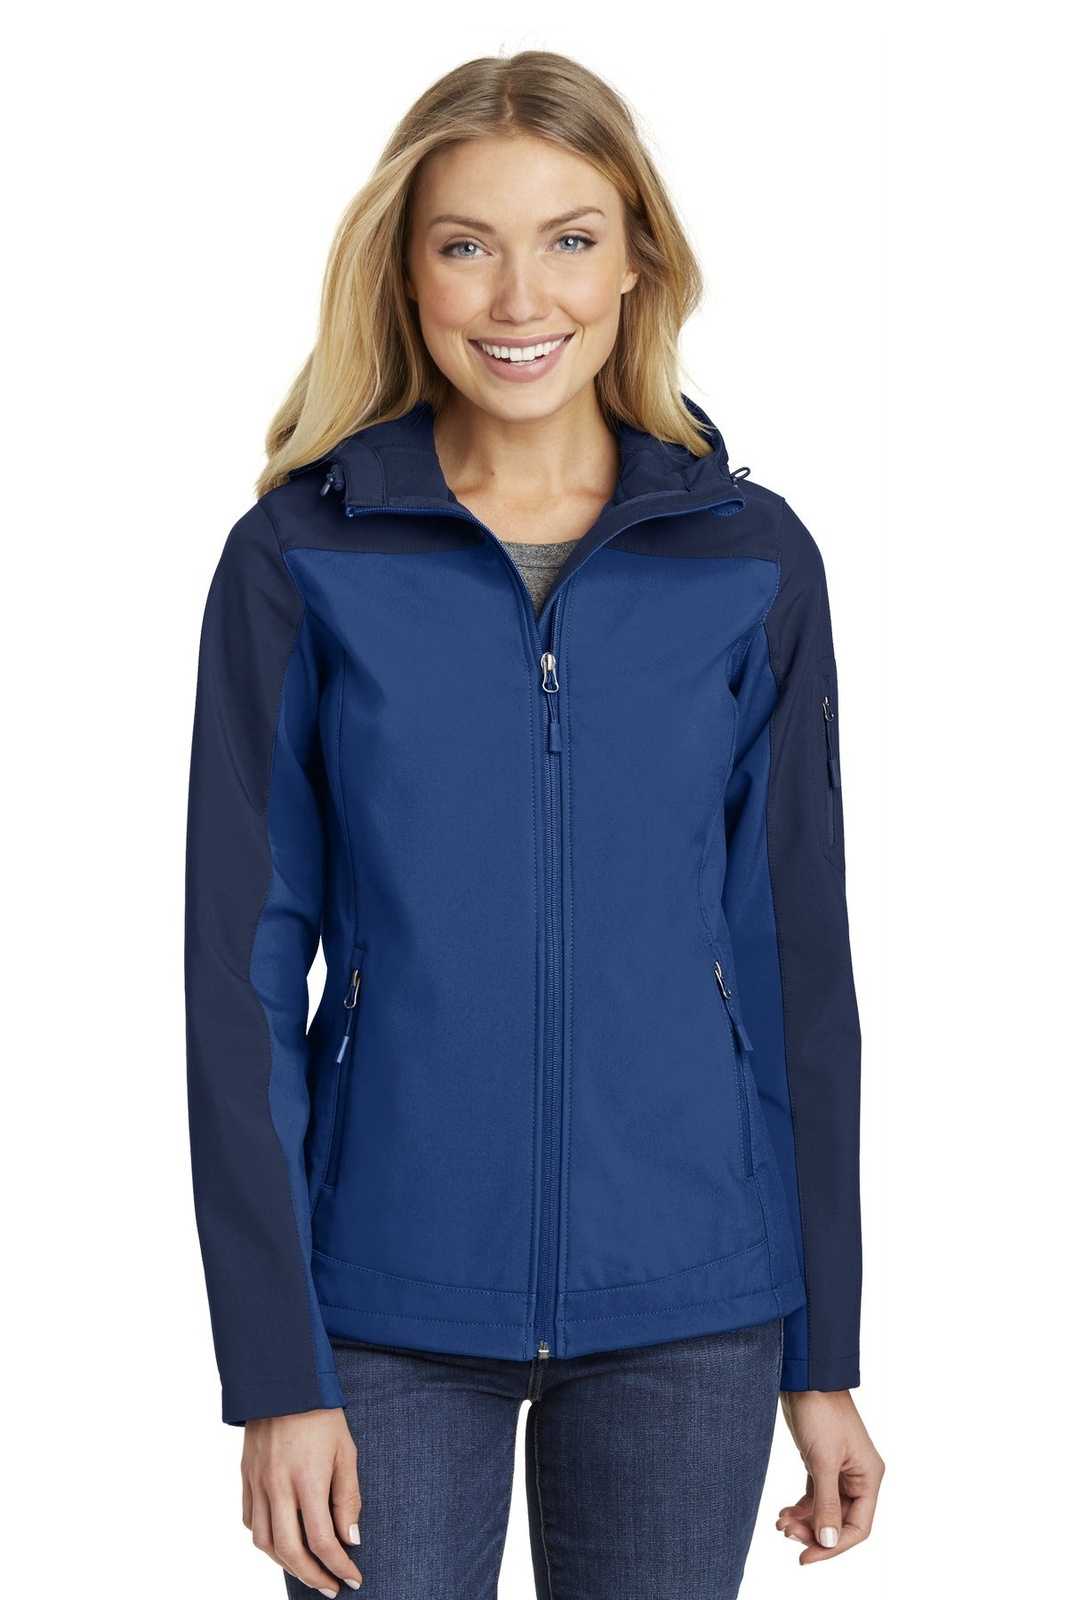 Port Authority L335 Ladies Hooded Core Soft Shell Jacket - Night Sky Blue Dress Blue Navy - HIT a Double - 1